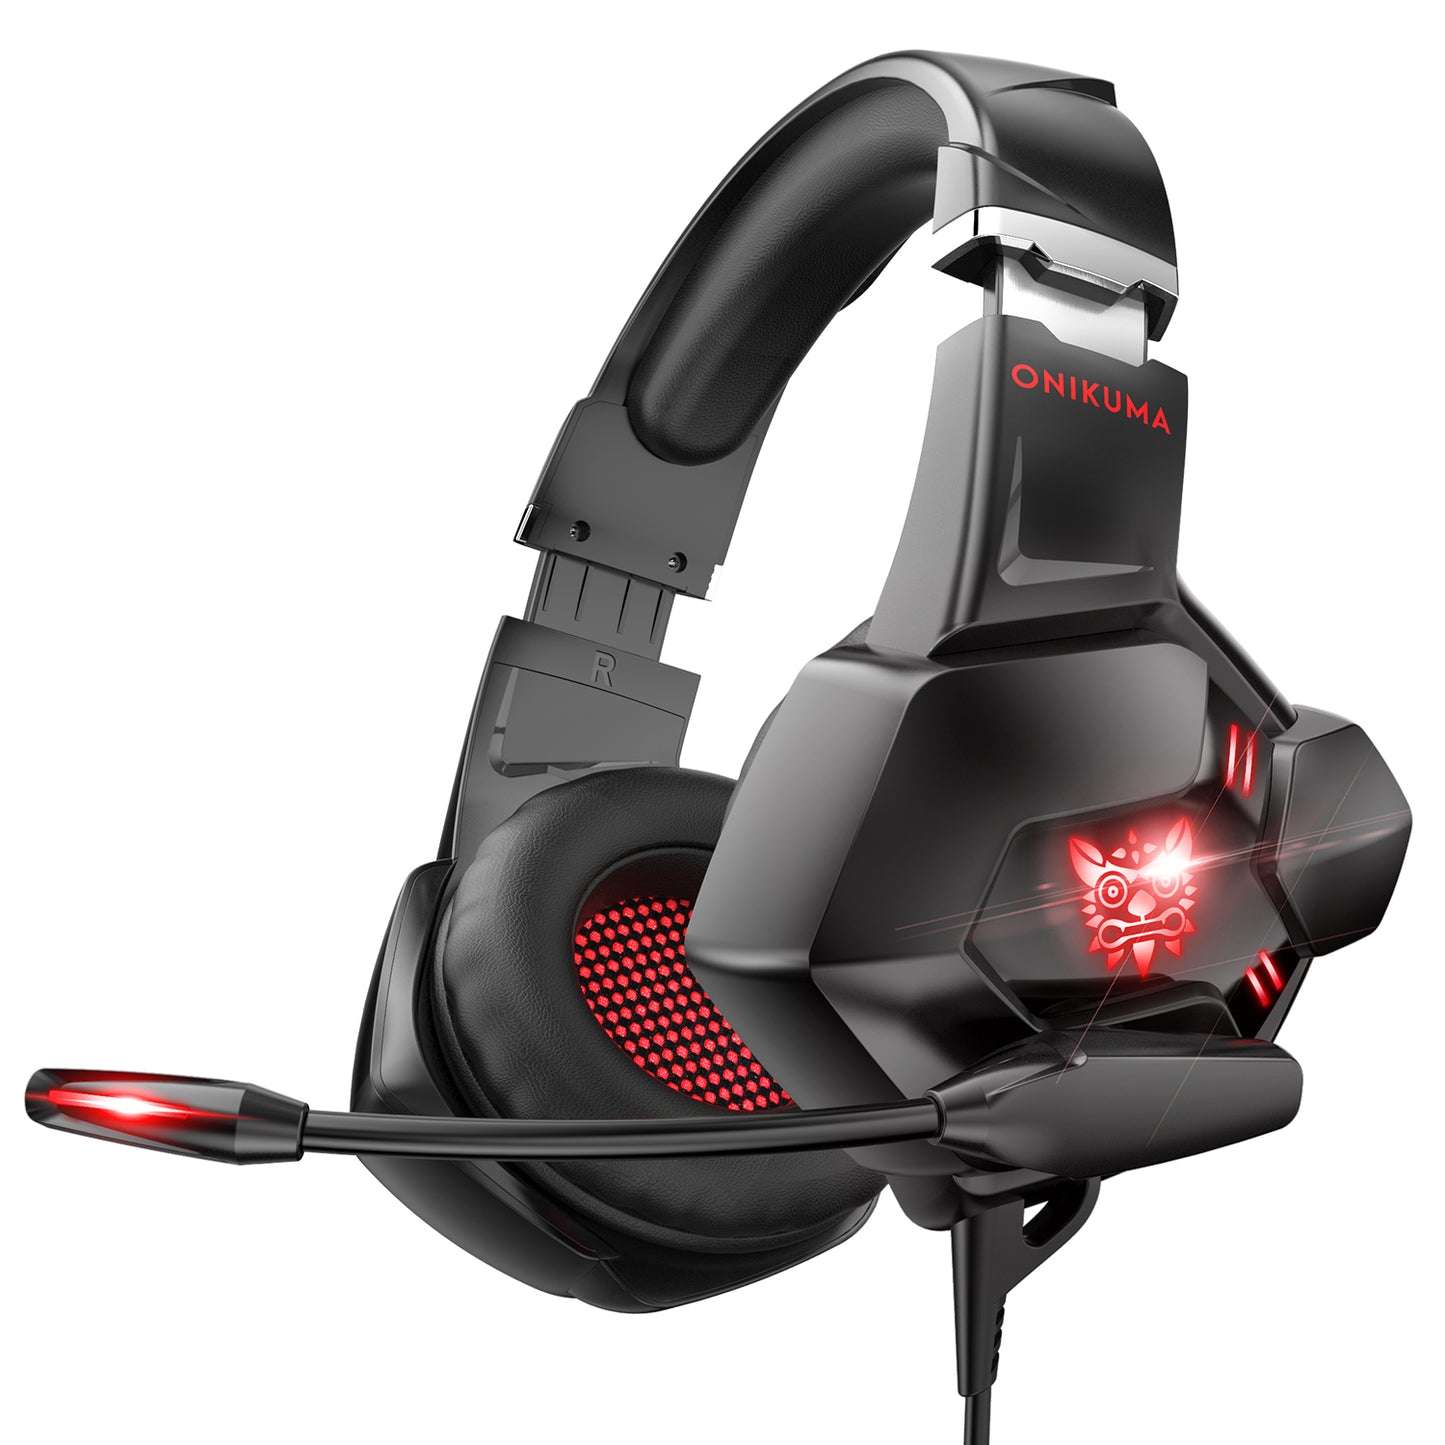 ONIKUMA K11 PS4 Gaming Headset with Mic and LED Light